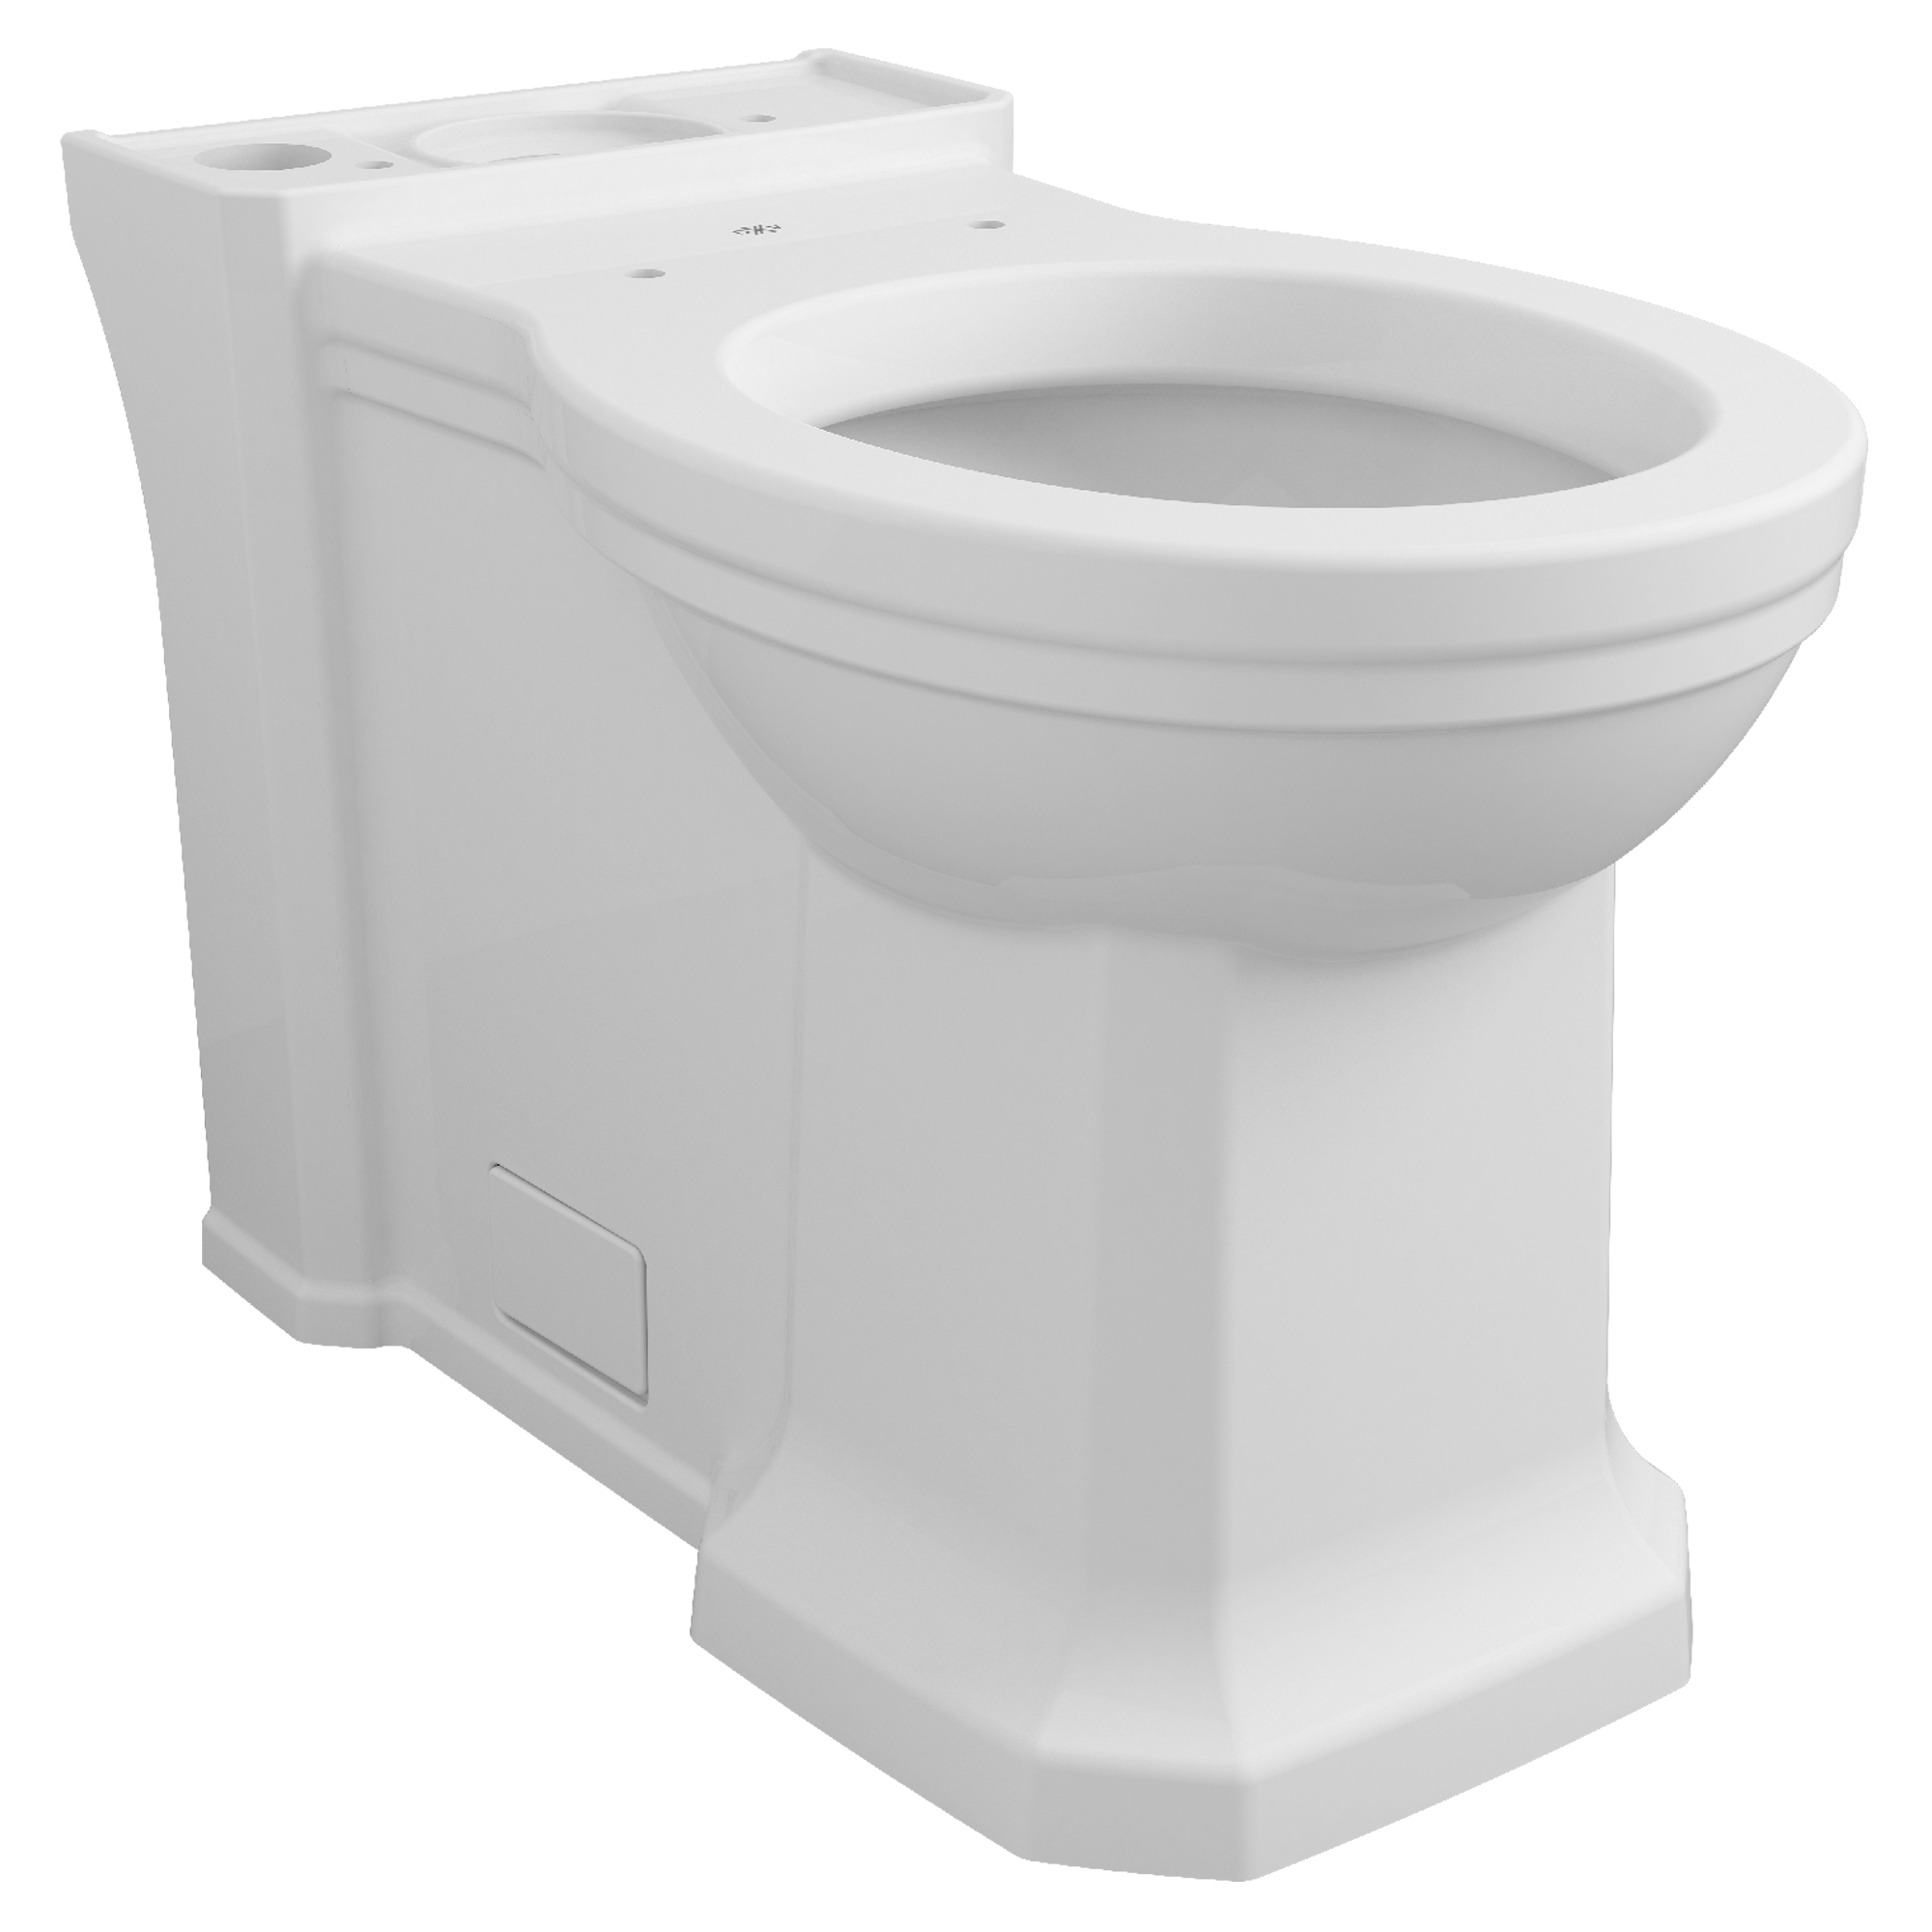 Fitzgerald™ Chair Height Elongated Toilet Bowl with Seat